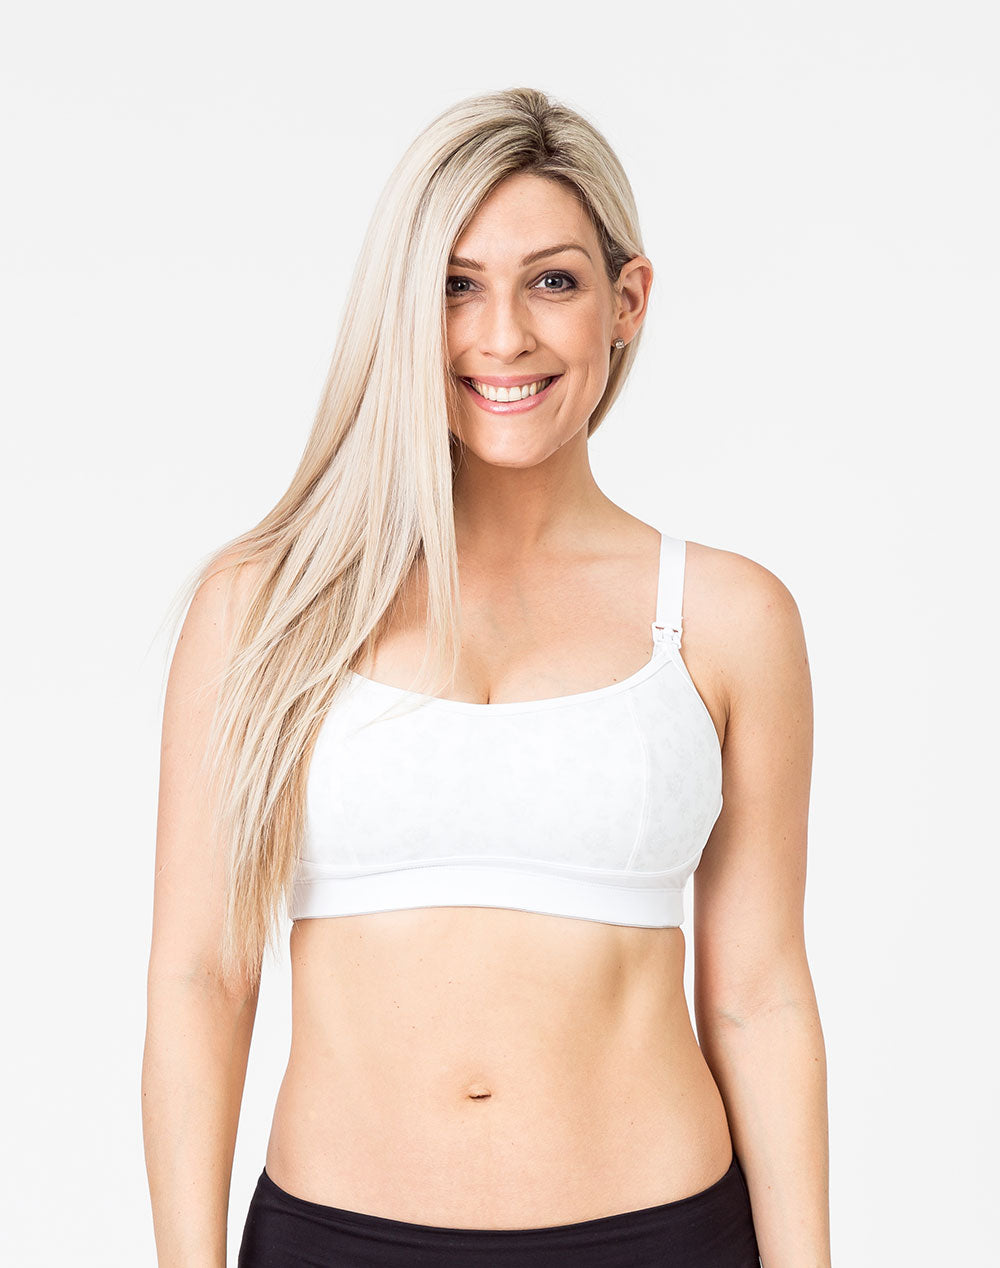 8 Supportive and Stylish Sports Bras from A cups to DDs